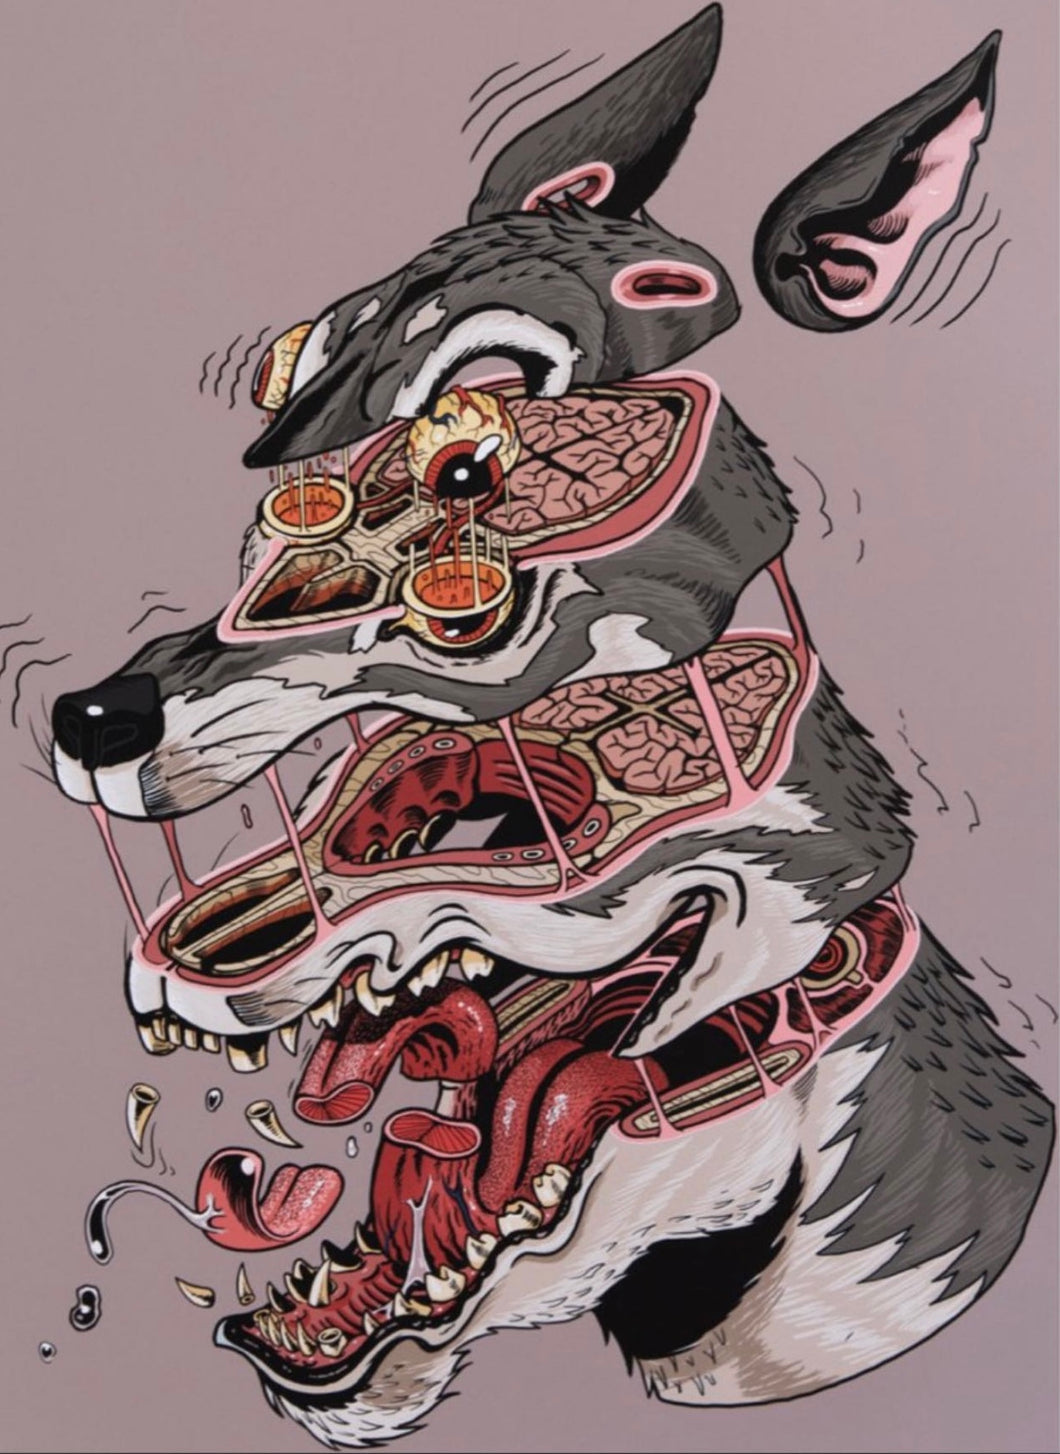 Nychos “Wolf Head Cross Section”